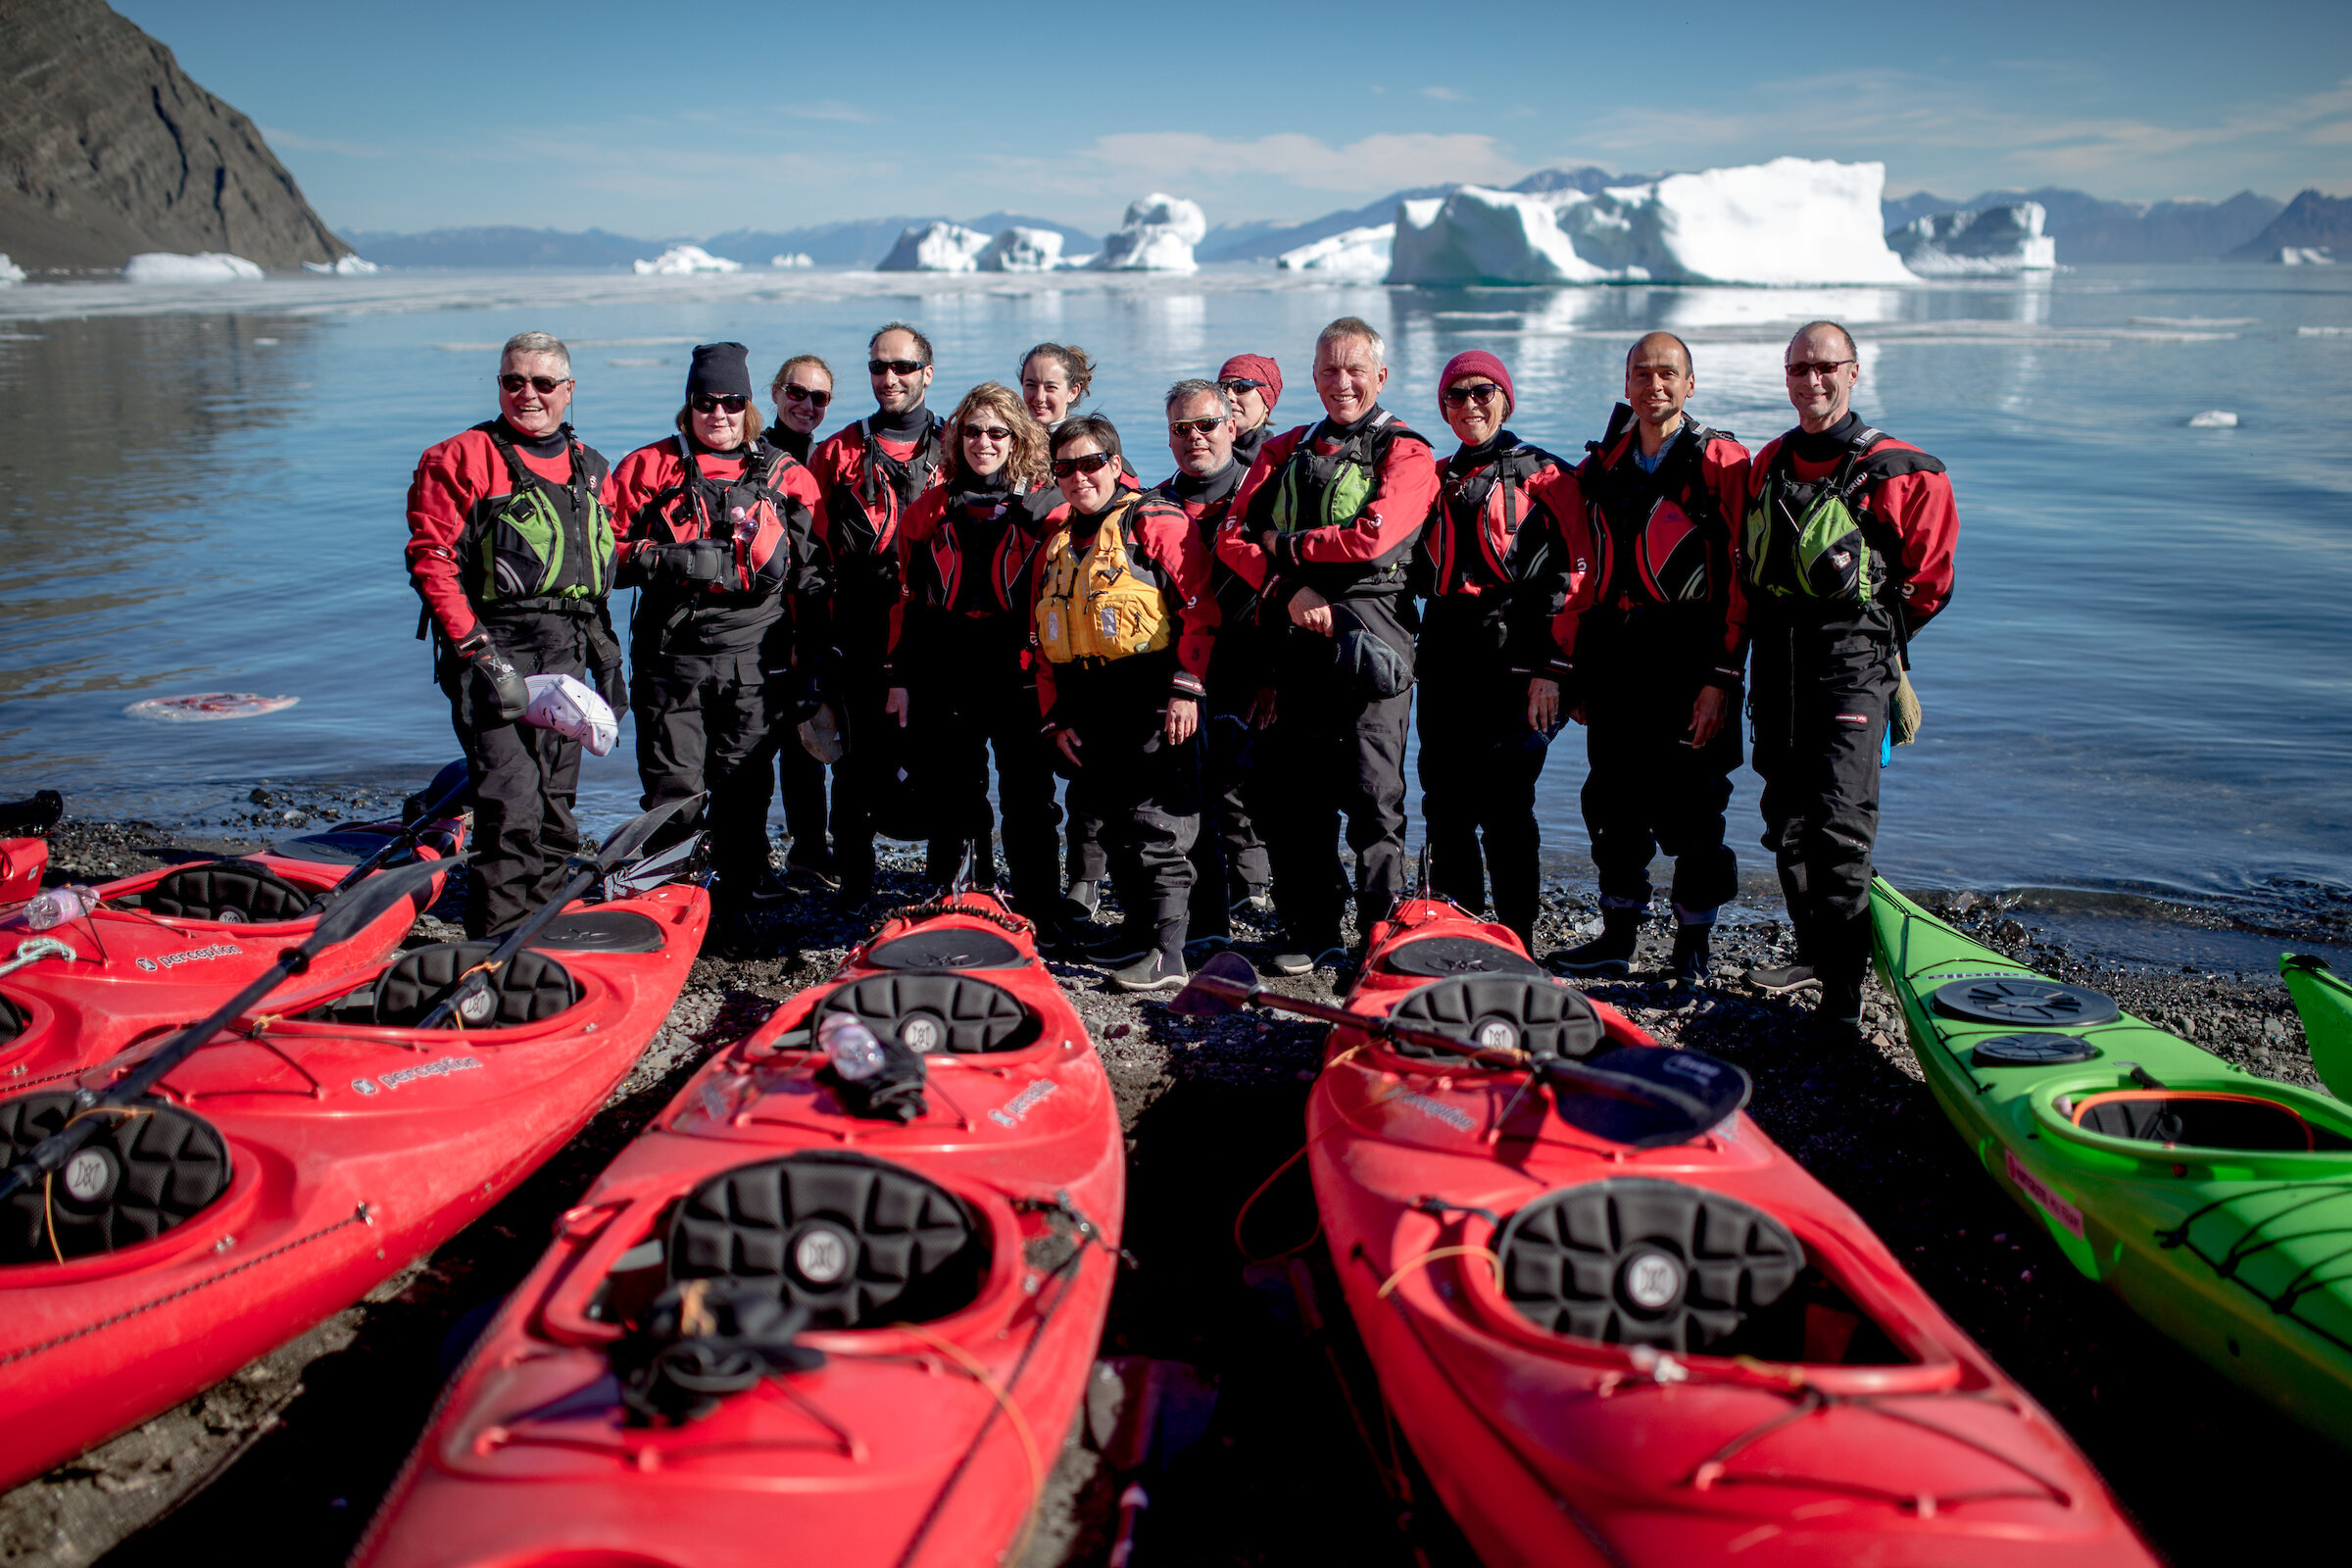 A%20group%20of%20kayakers%20from%20ms%20fram%20on%20the%20beach%20in%20illorsuit%20in%20greenland